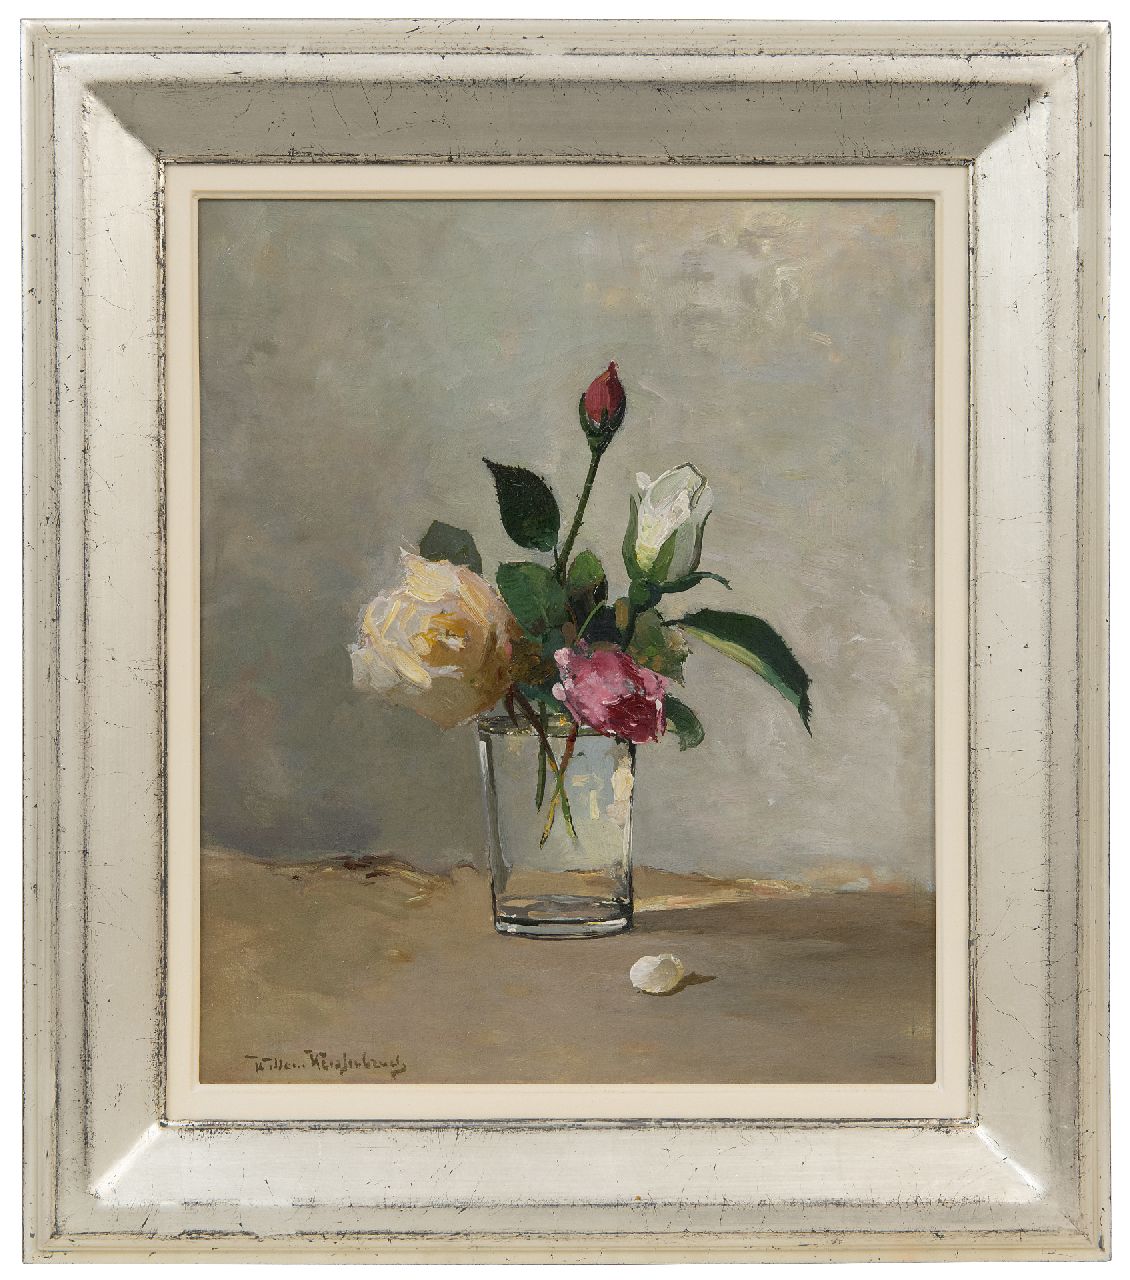 Weissenbruch W.J.  | 'Willem' Johannes Weissenbruch | Paintings offered for sale | Still life with roses in a glass, oil on canvas 31.9 x 27.0 cm, signed l.l.